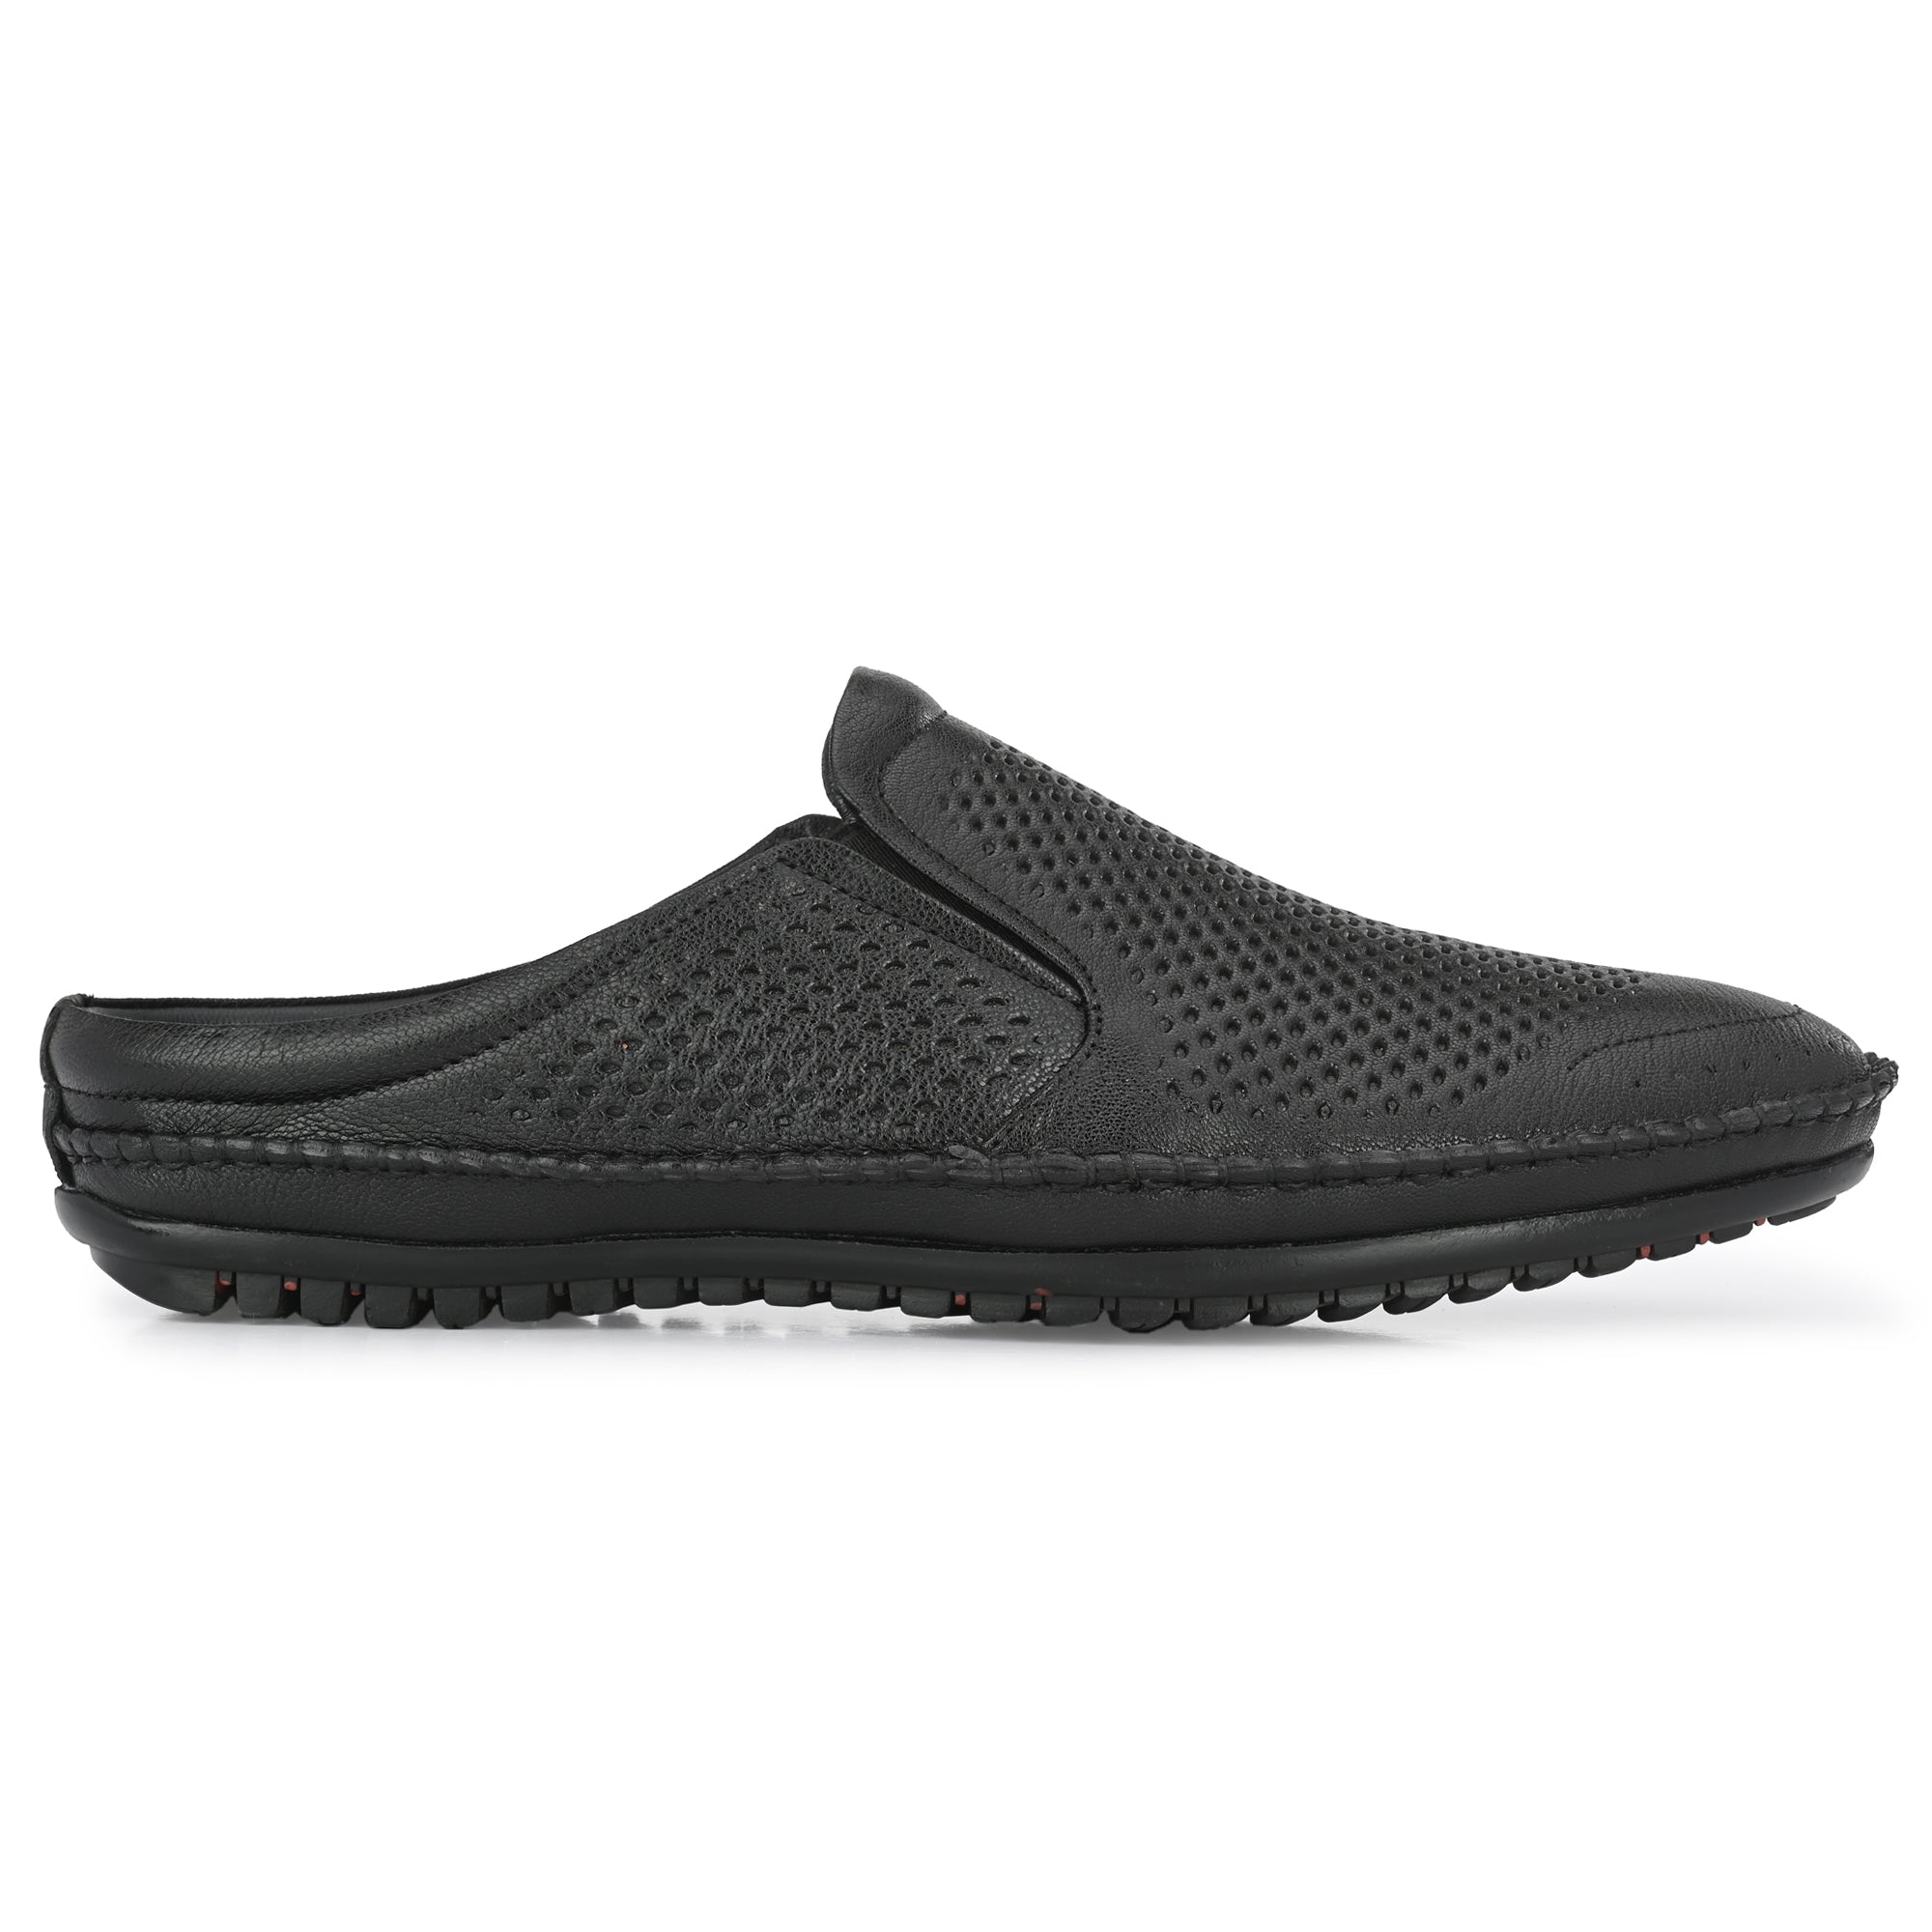 Egoss Leather Casual Slip On Shoes For Men